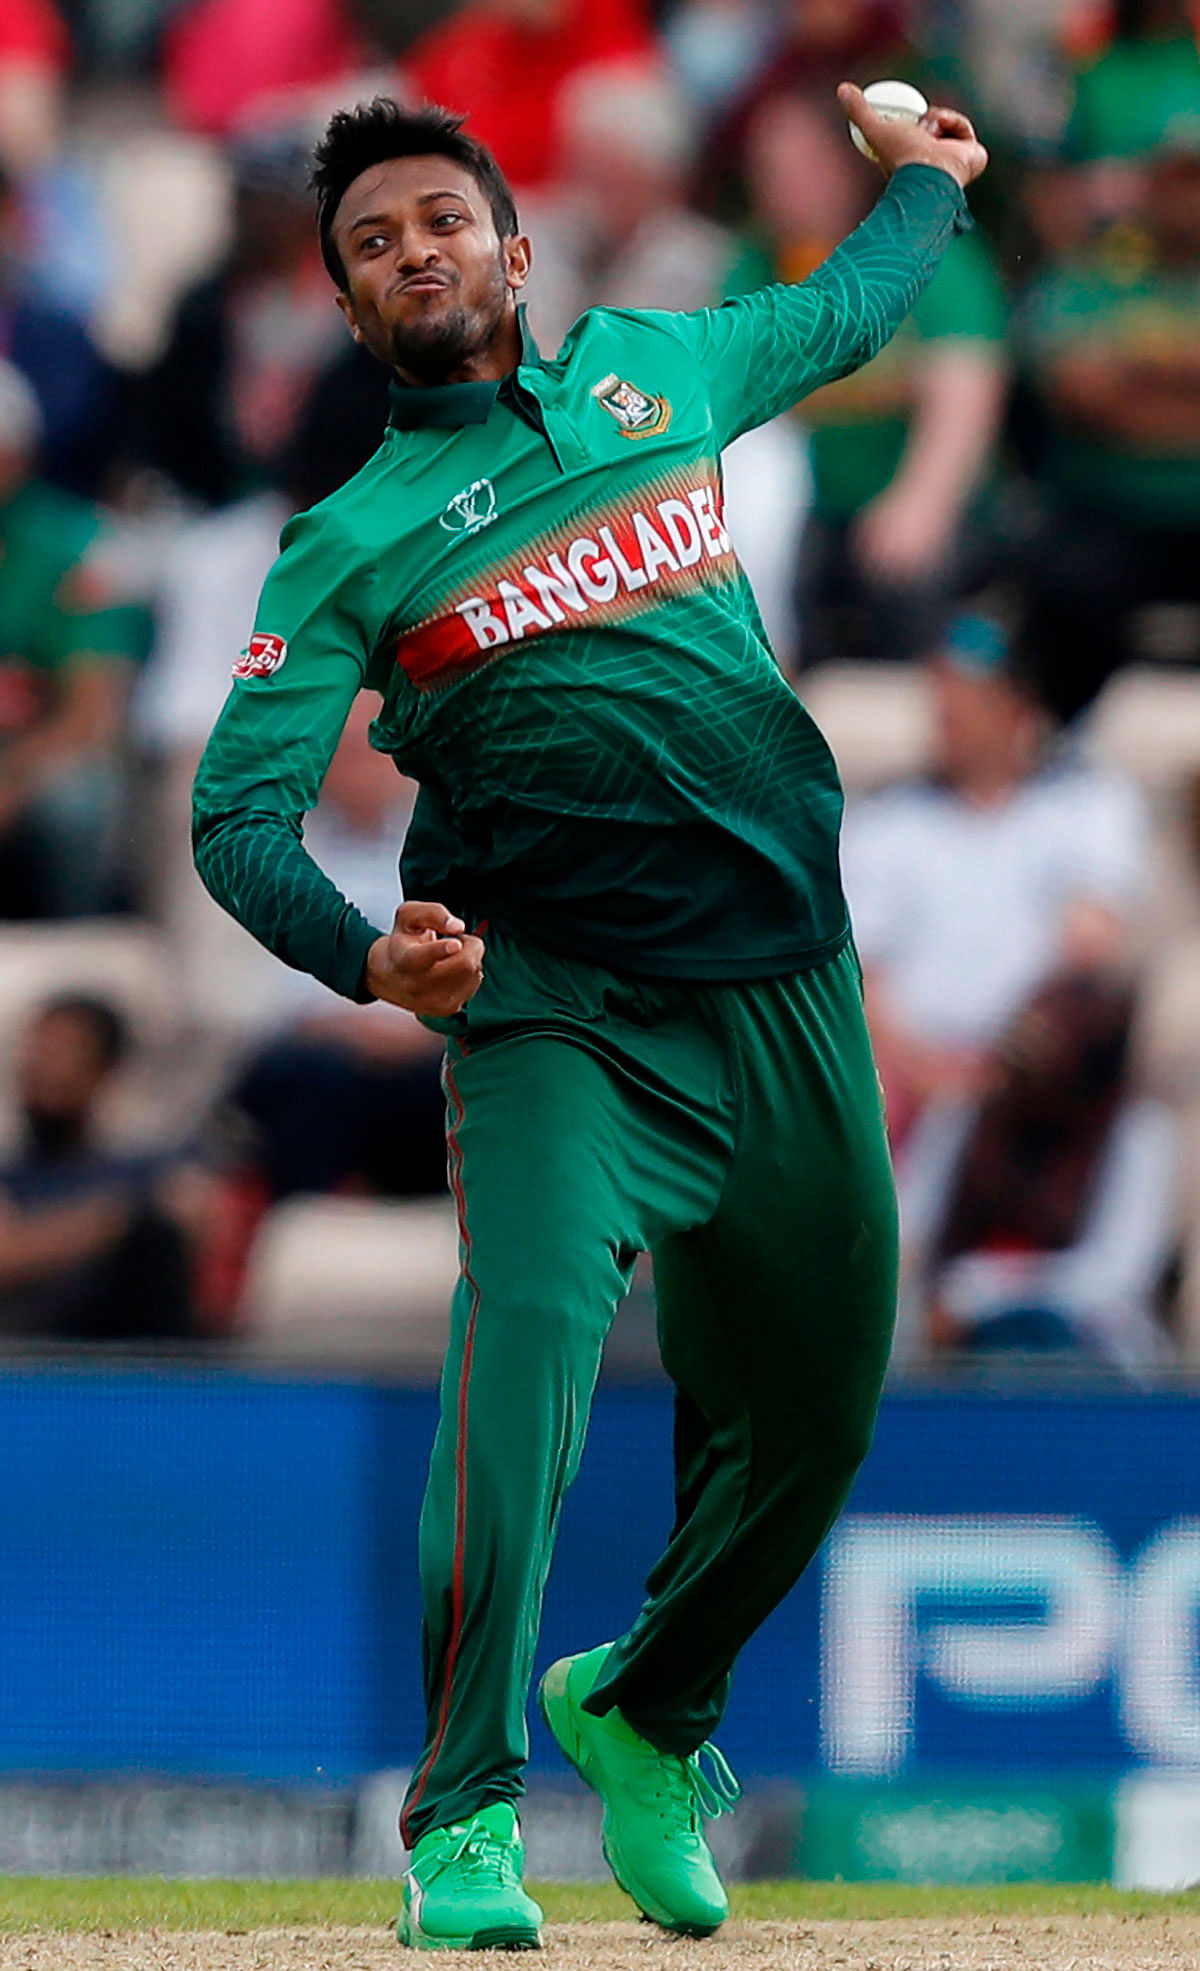 Bangladesh`s Shakib Al Hasan delivers a ball during the 2019 Cricket World Cup group stage match between Bangladesh and Afghanistan at the Rose Bowl in Southampton, southern England, on 24 June 2019. Photo: AFP